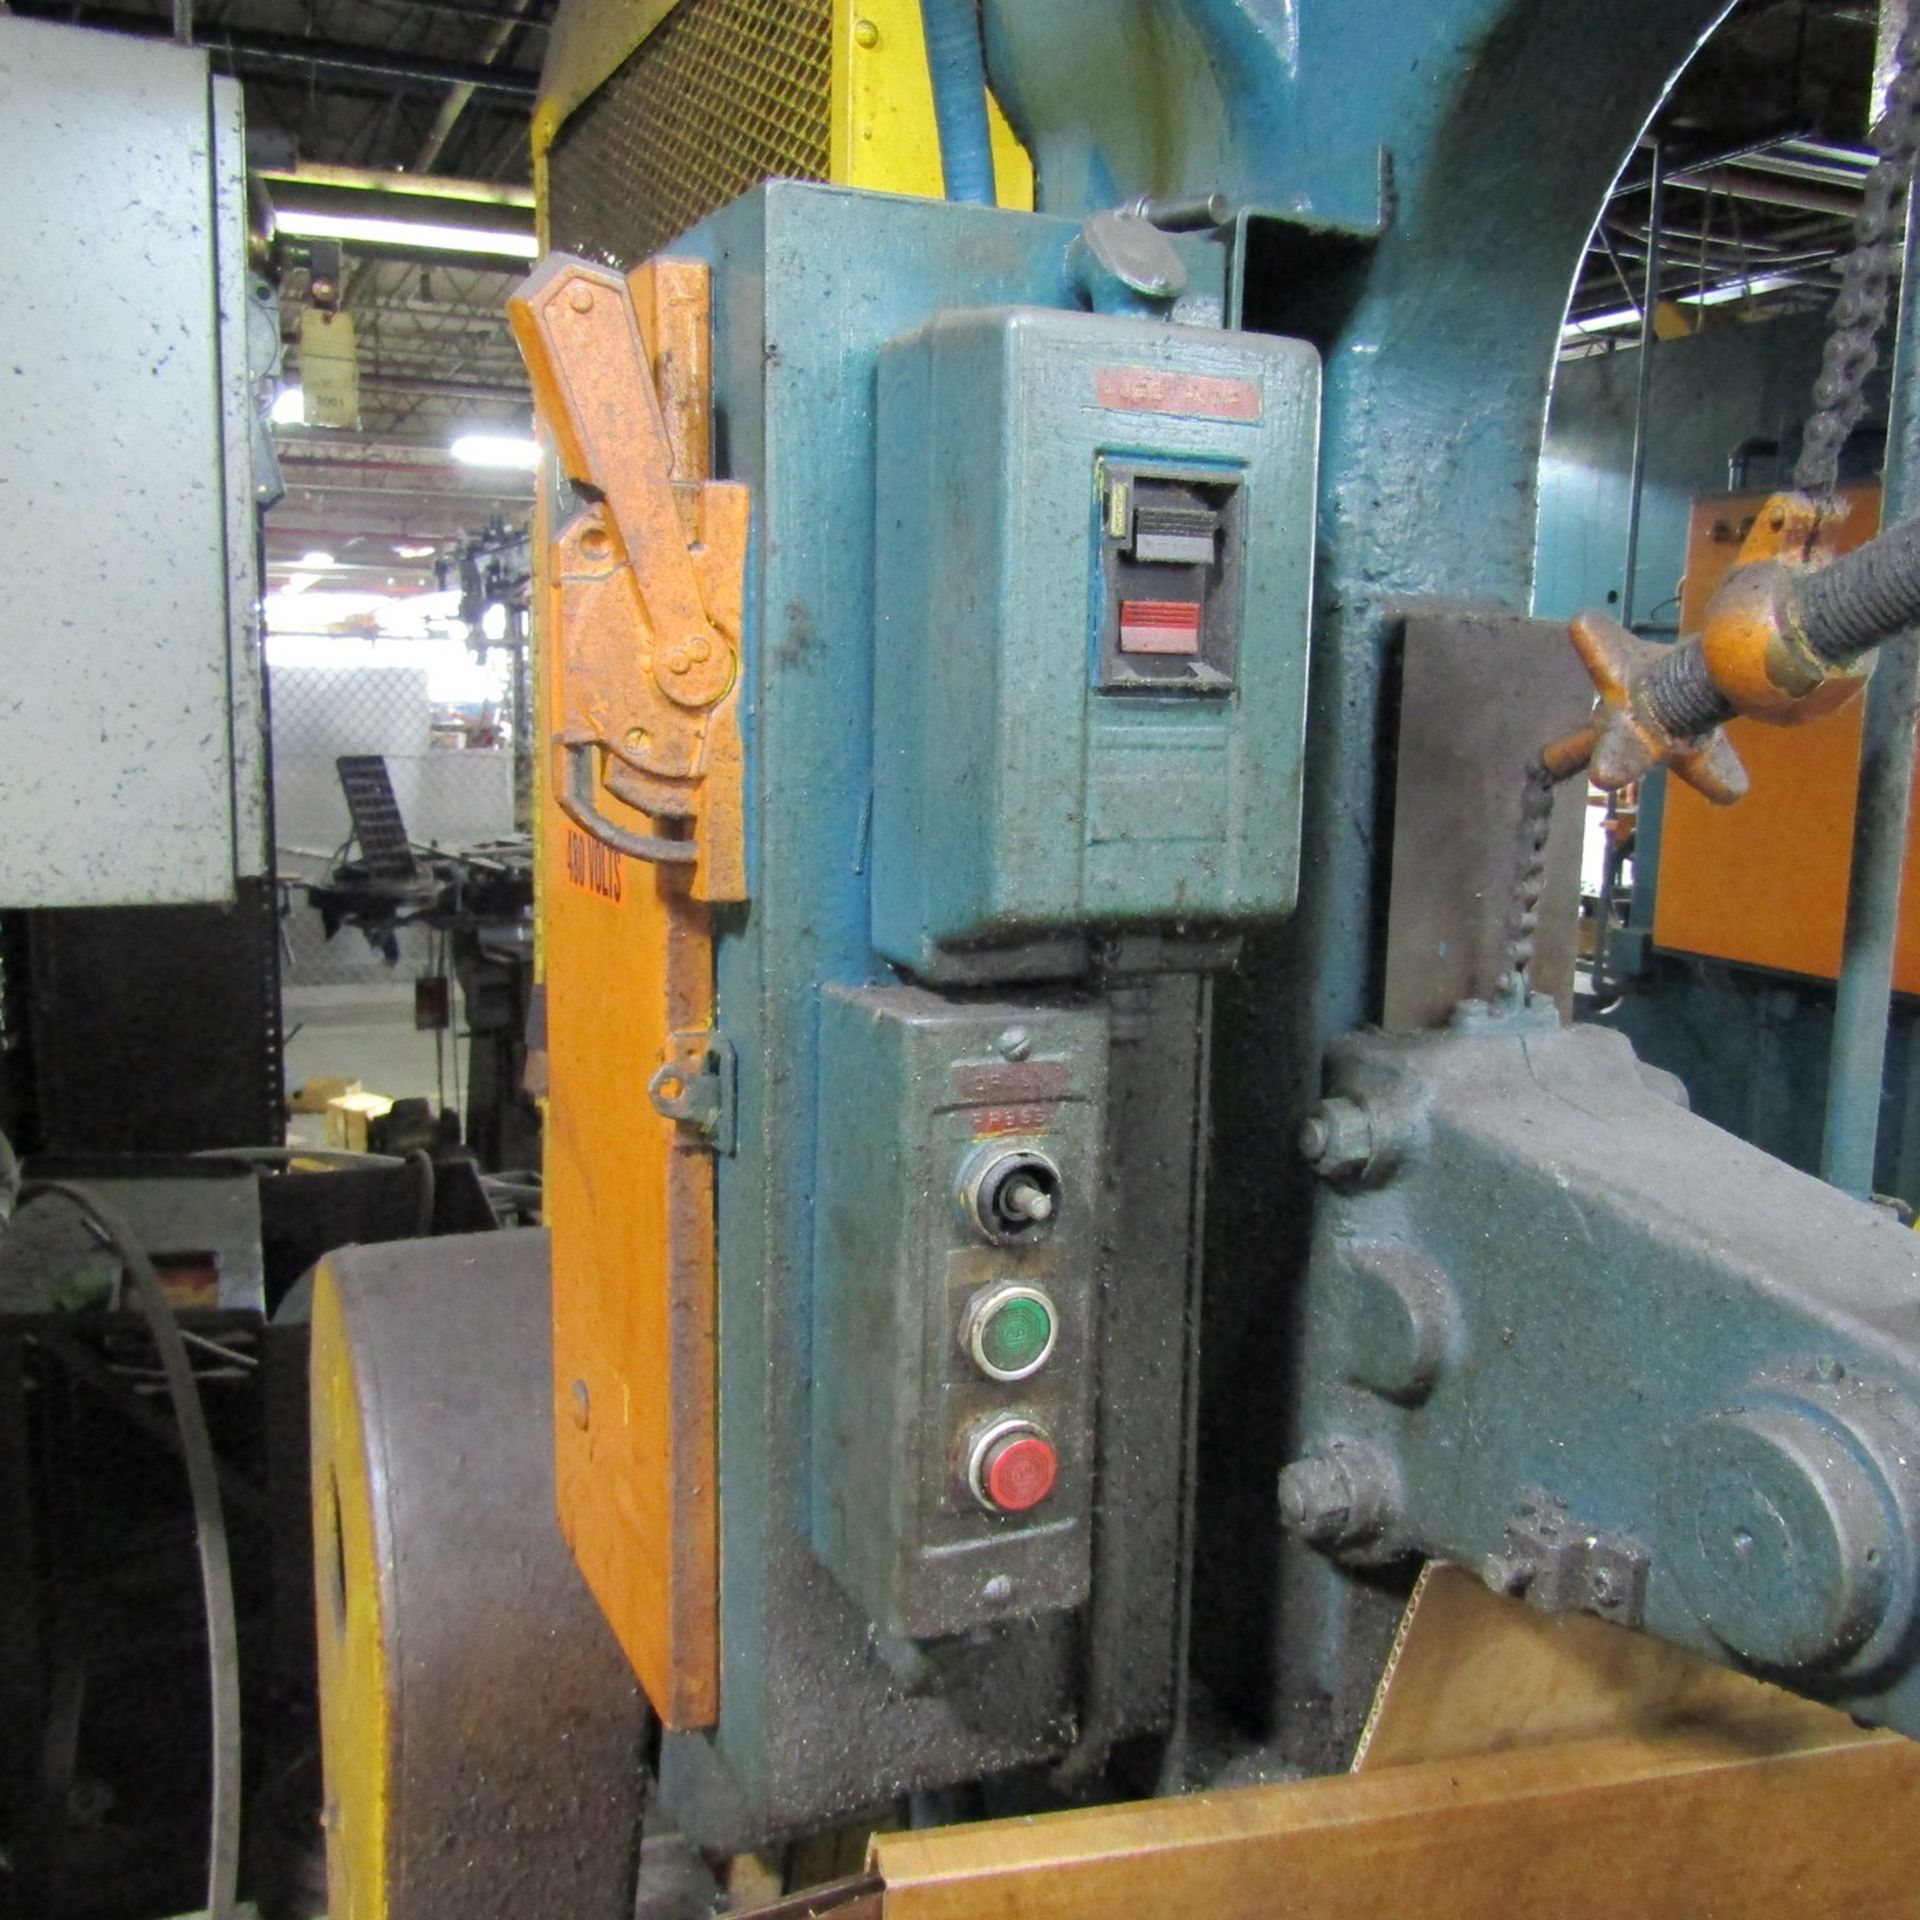 Avey 24 in. Single Spindle Vertical Boring Machine (Ref. #: 1847) - Image 4 of 4